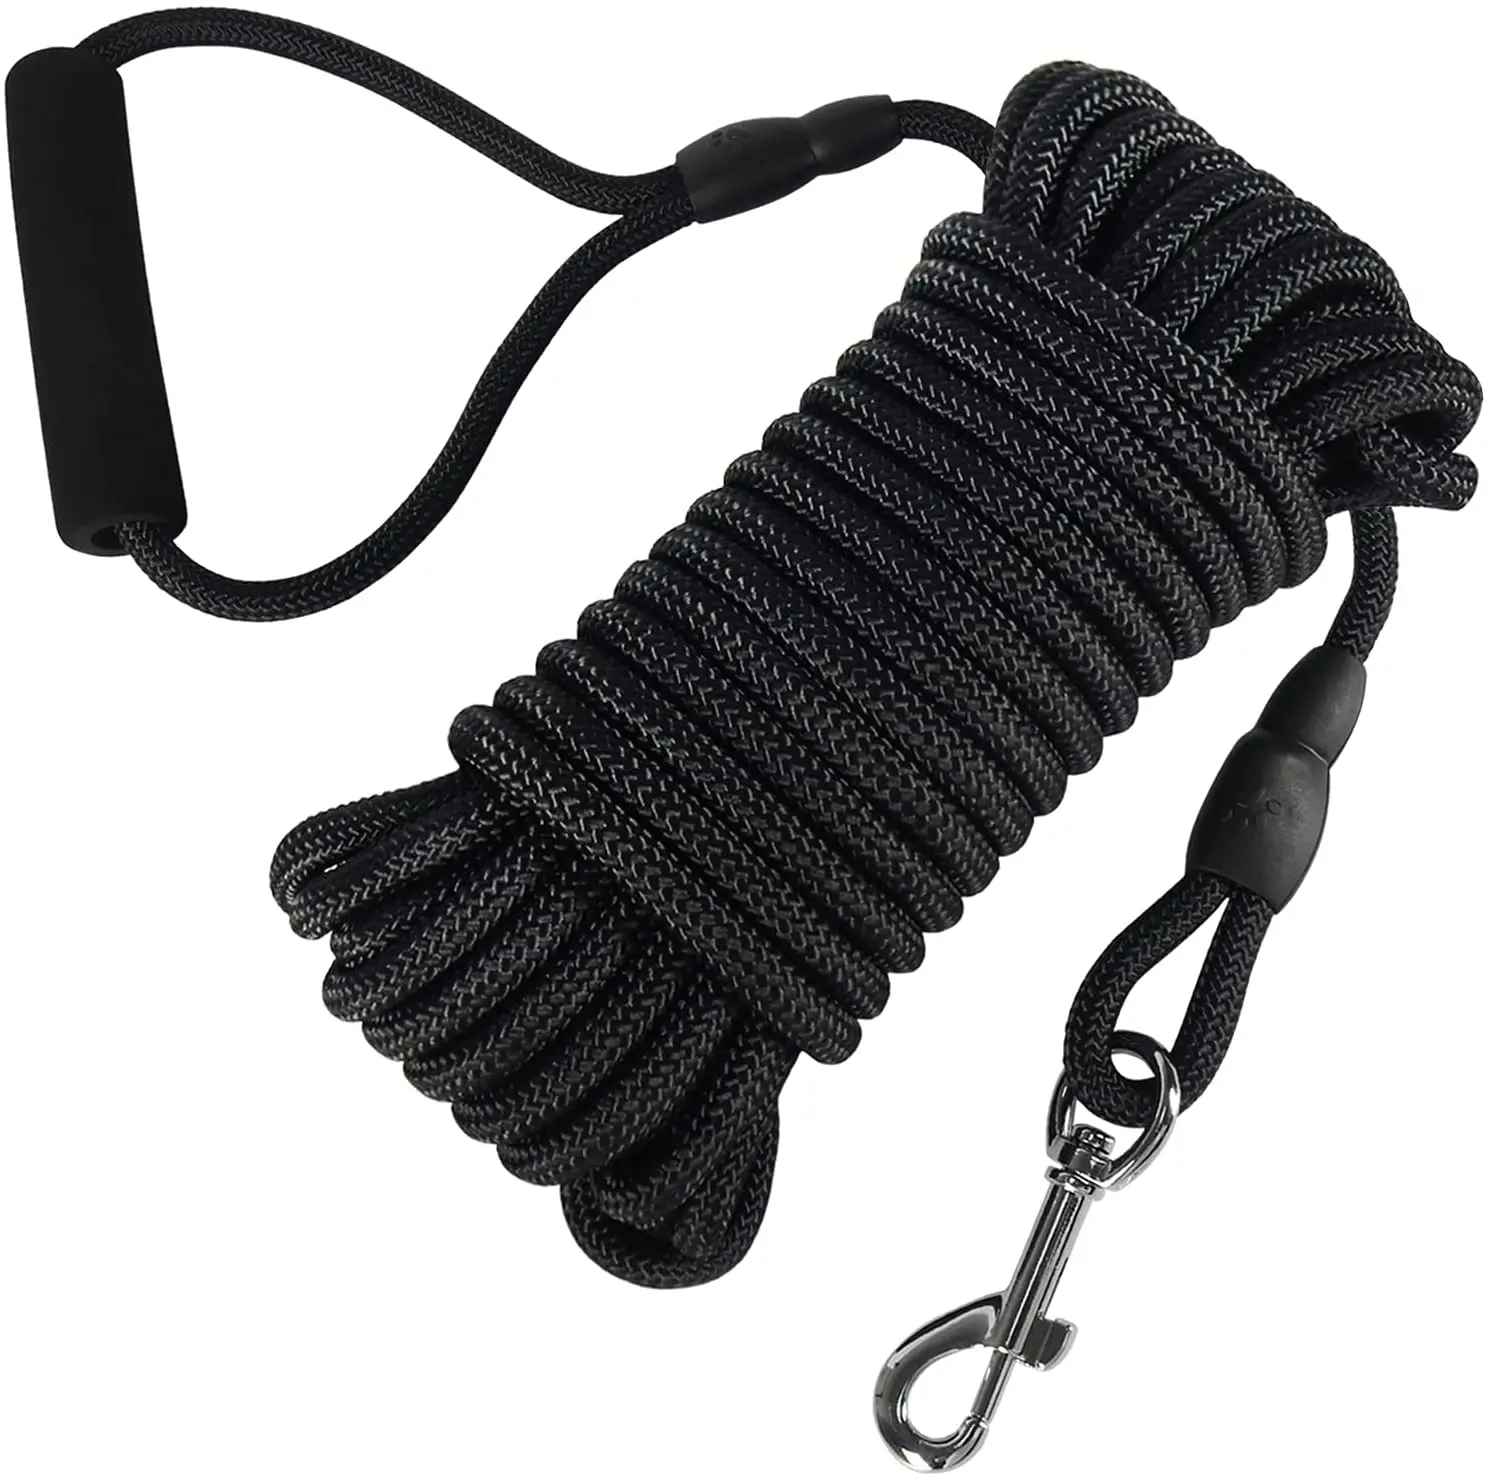 

Amazon Hot Selling Nylon Rope Braided Tactical Float 6/10m Long Running Pet Dog Leash Leads, 3 colors